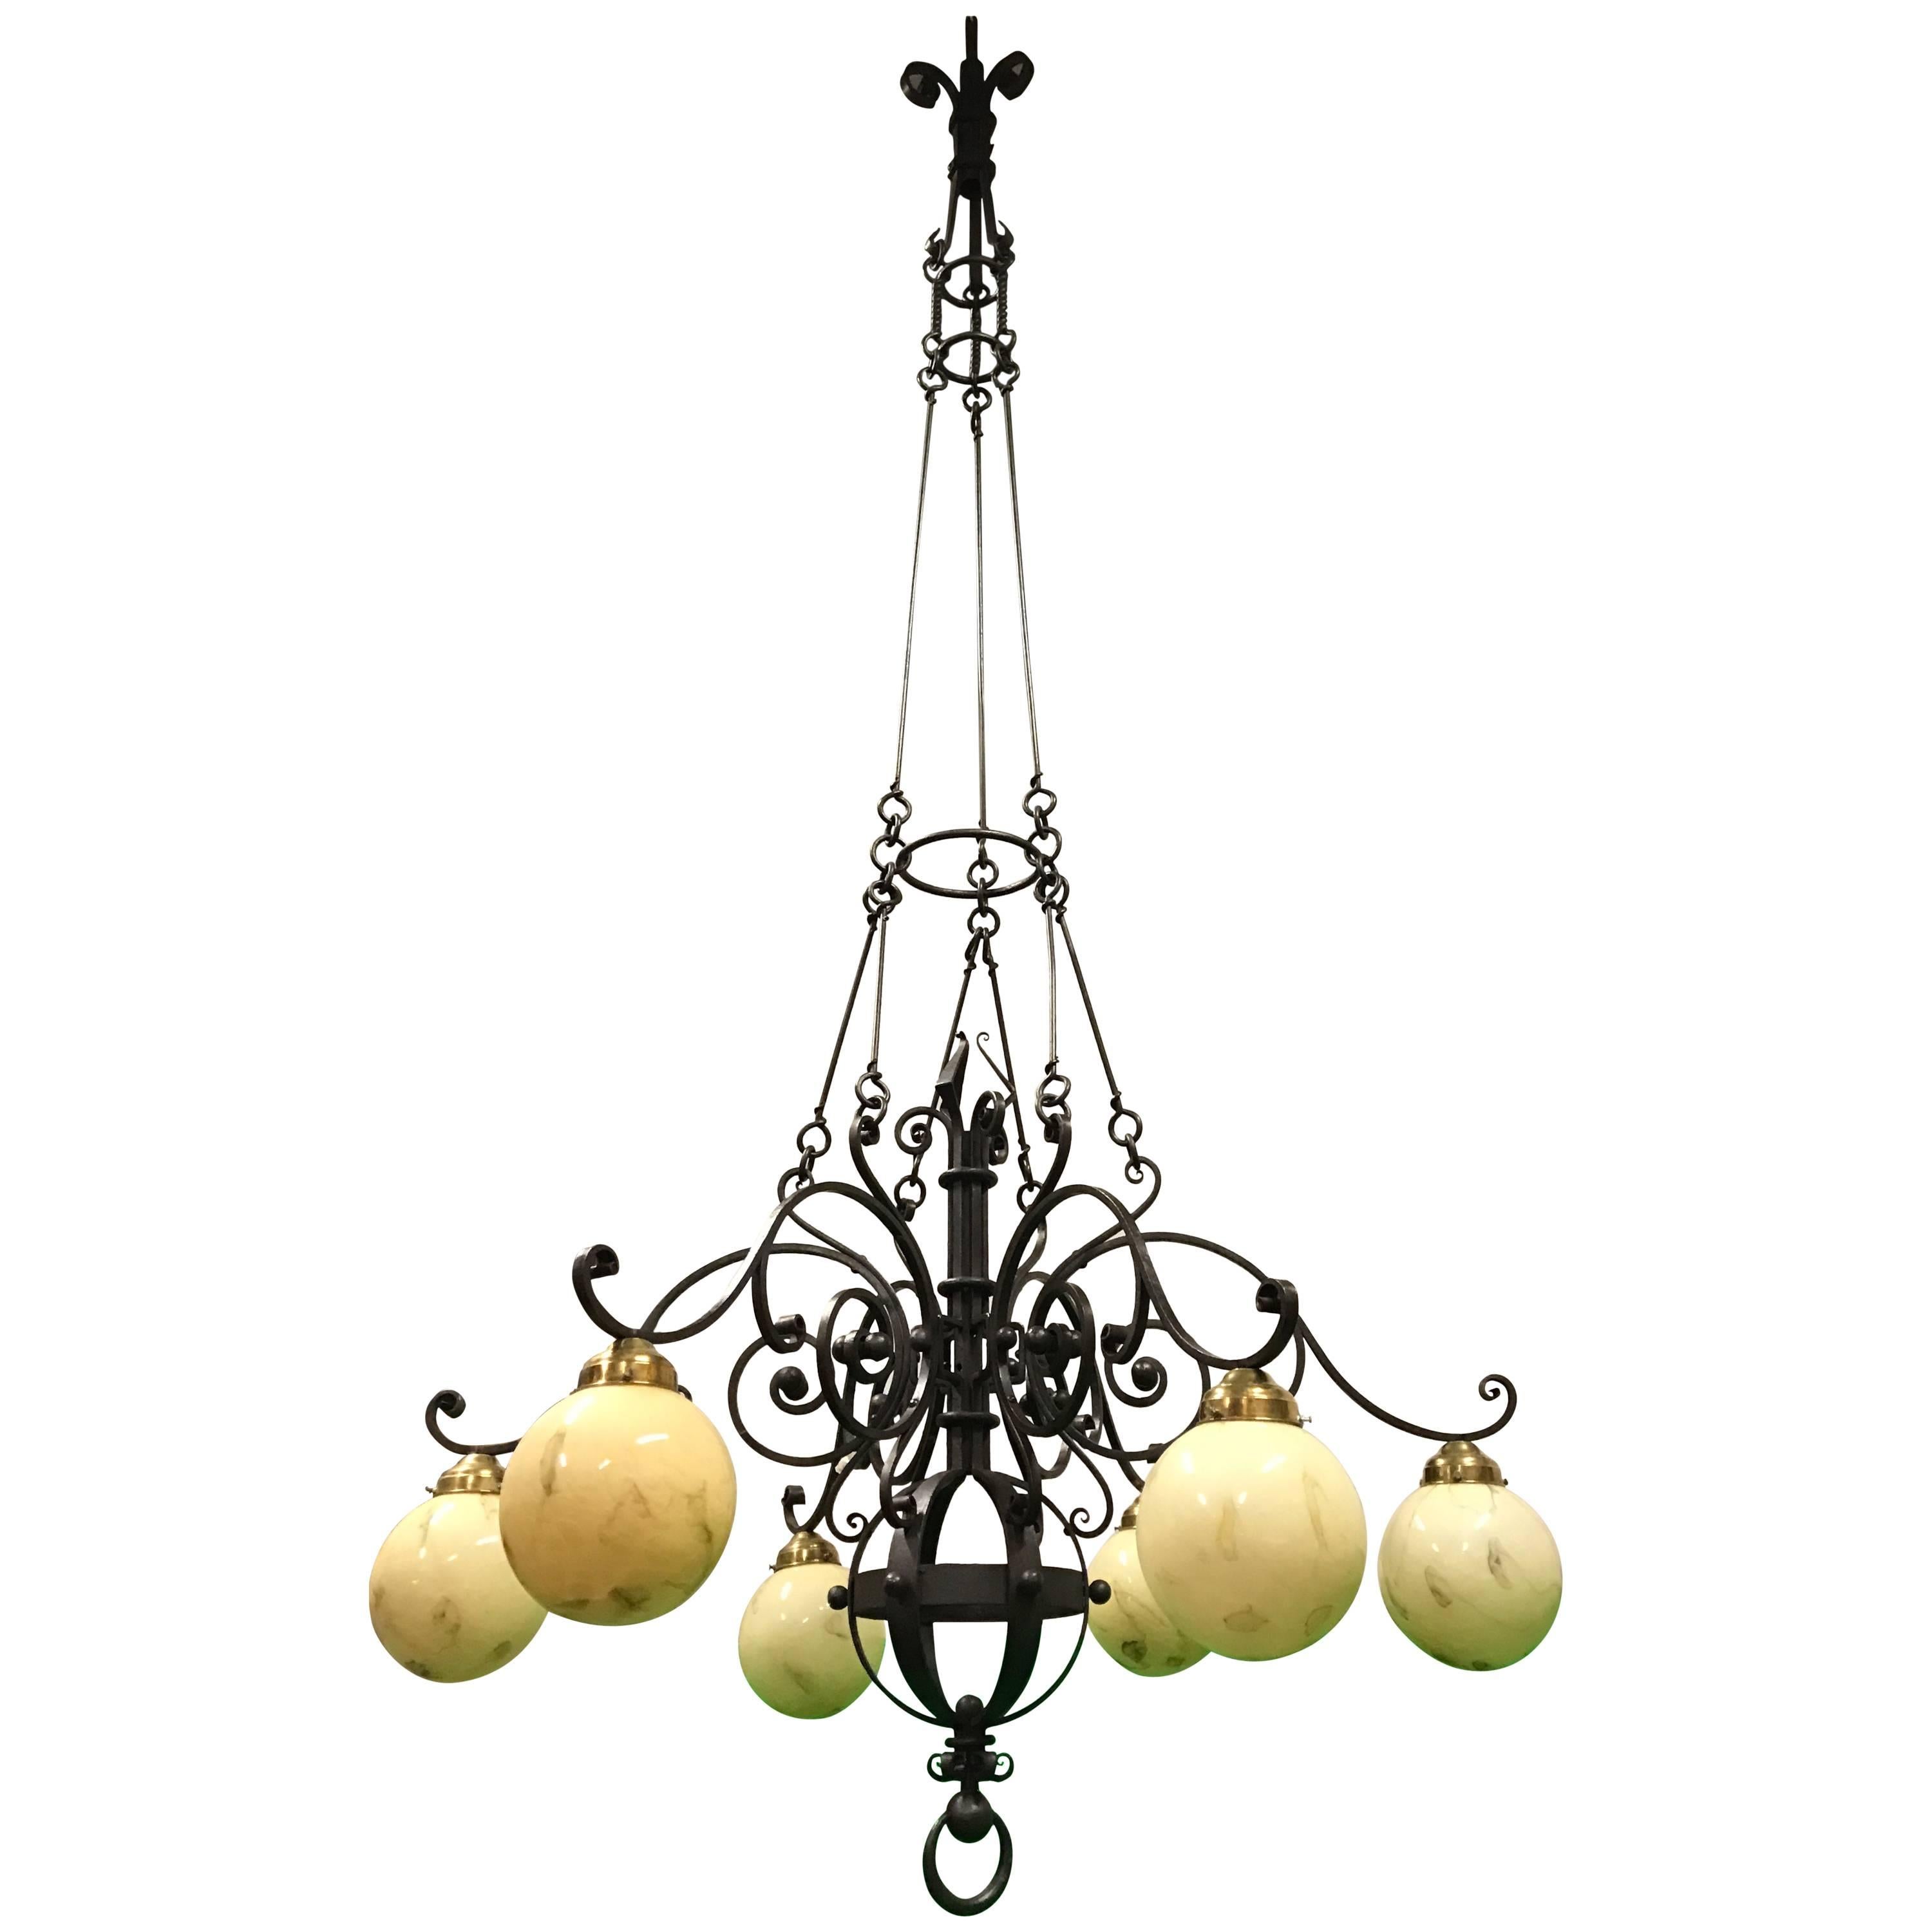  Huge 9 Feet High, Arts & Crafts Wrought Iron, Marbled Glass Chandelier Pendant 